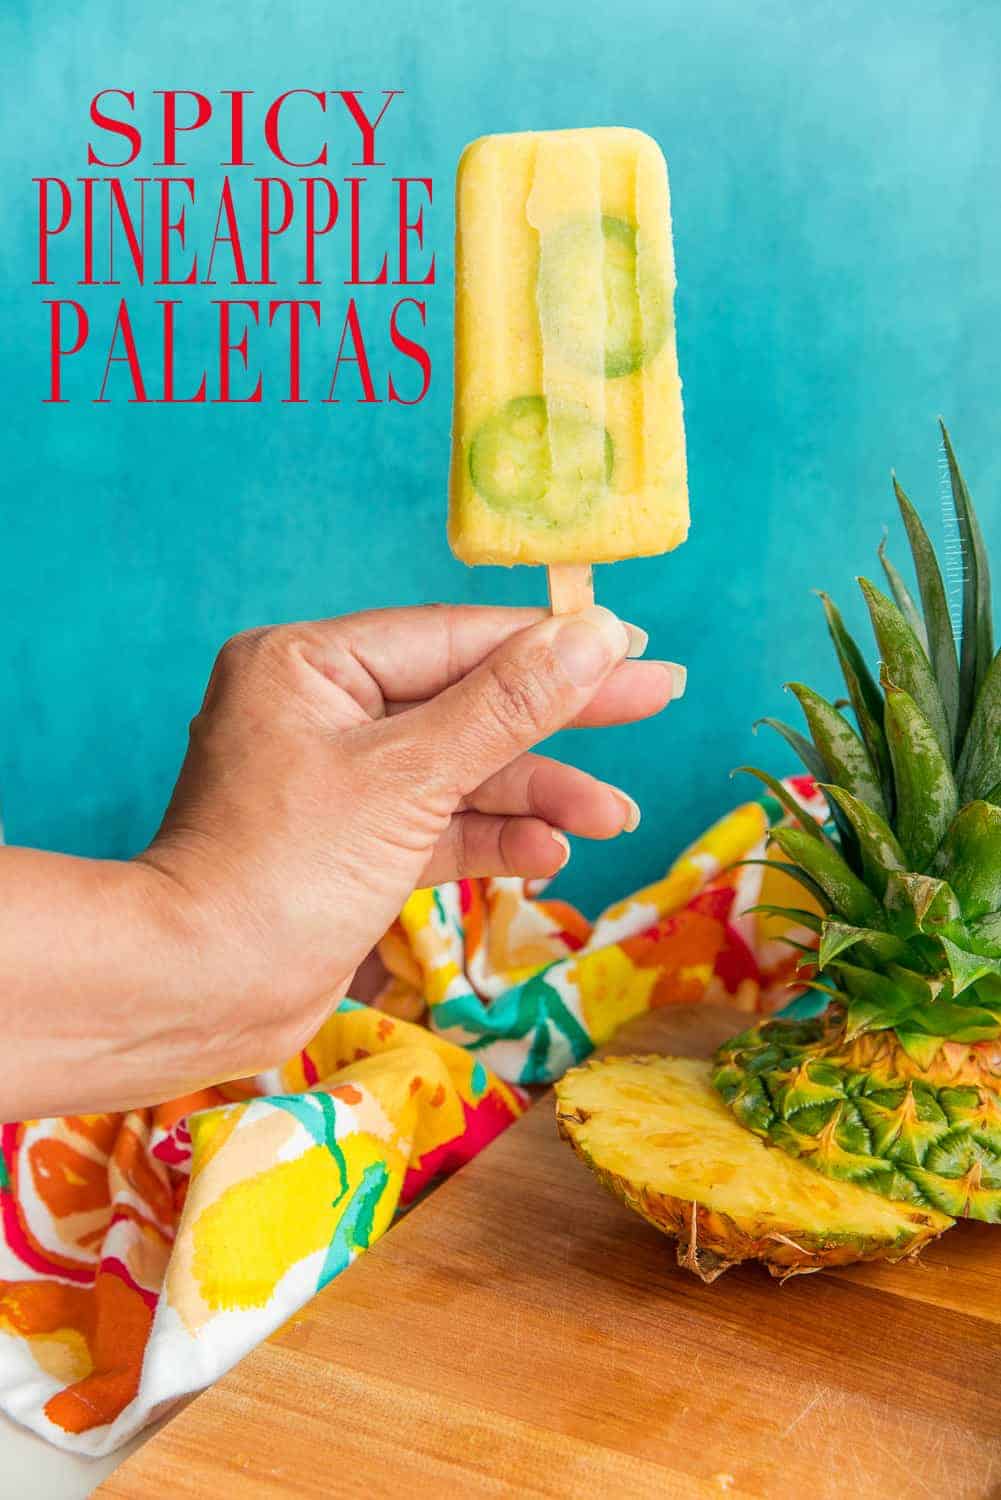 Spicy Pineapple Paletas are made with fresh pineapple and given a bit of heat from fresh jalapeños. Be sure to use ripe pineapples for the best flavors. Completely all natural. #paletas #CincodeMayo #popsicles #icepops #Summerdesserts #fruitdesserts #icecream #sorbet via @ediblesense